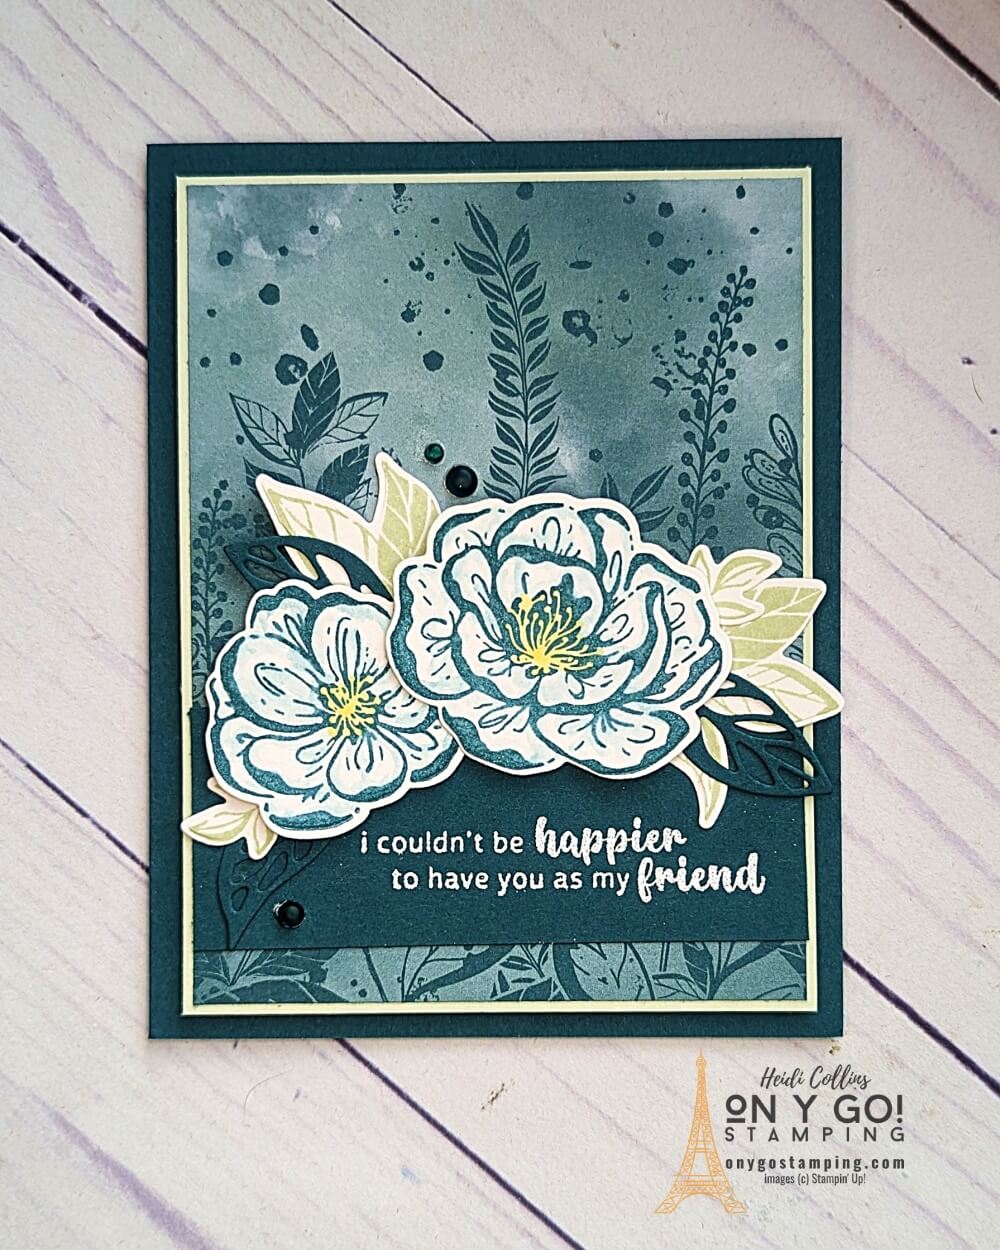 Are you looking for something special to add a little extra charm and flair to your next handmade card project? Look no further than the Irresistible Blooms stamp set from Stampin' Up!, along with some beautiful patterned paper! This gorgeous set of stamps and patterned paper will make your projects stand out and be sure to make them irresistible!